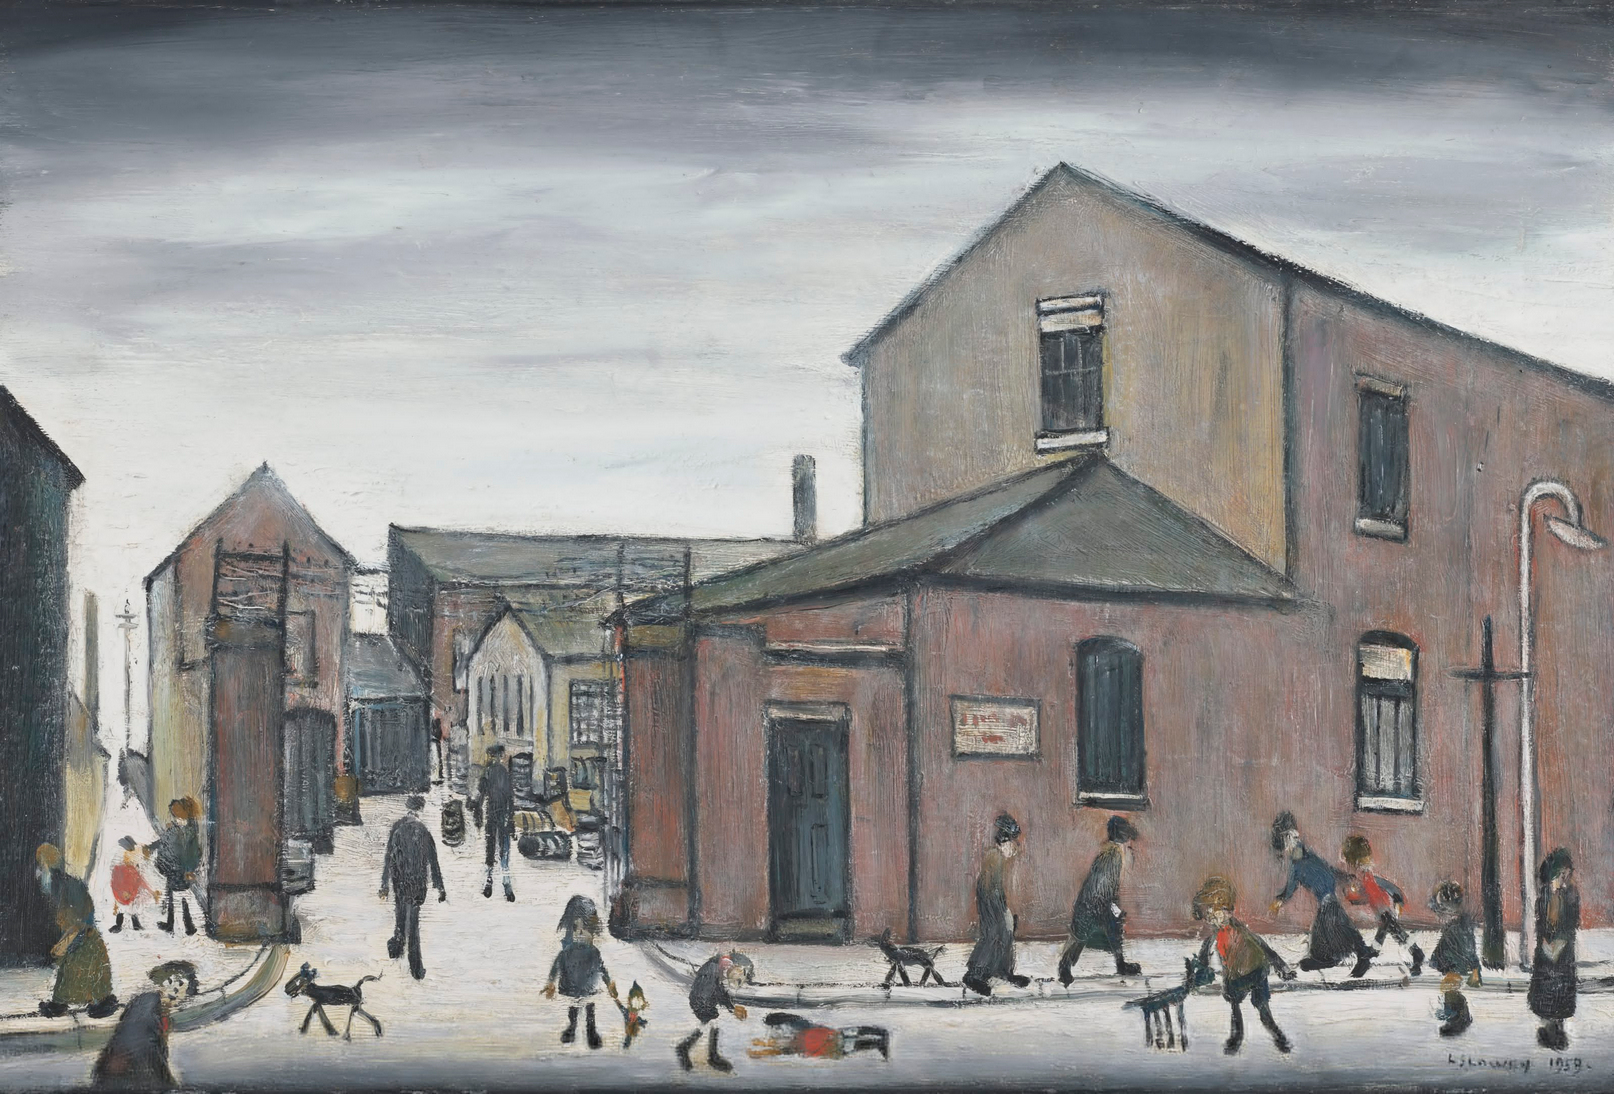 Viaduct Works, Manchester (1959) by Laurence Stephen Lowry (1887 - 1976), English artist.